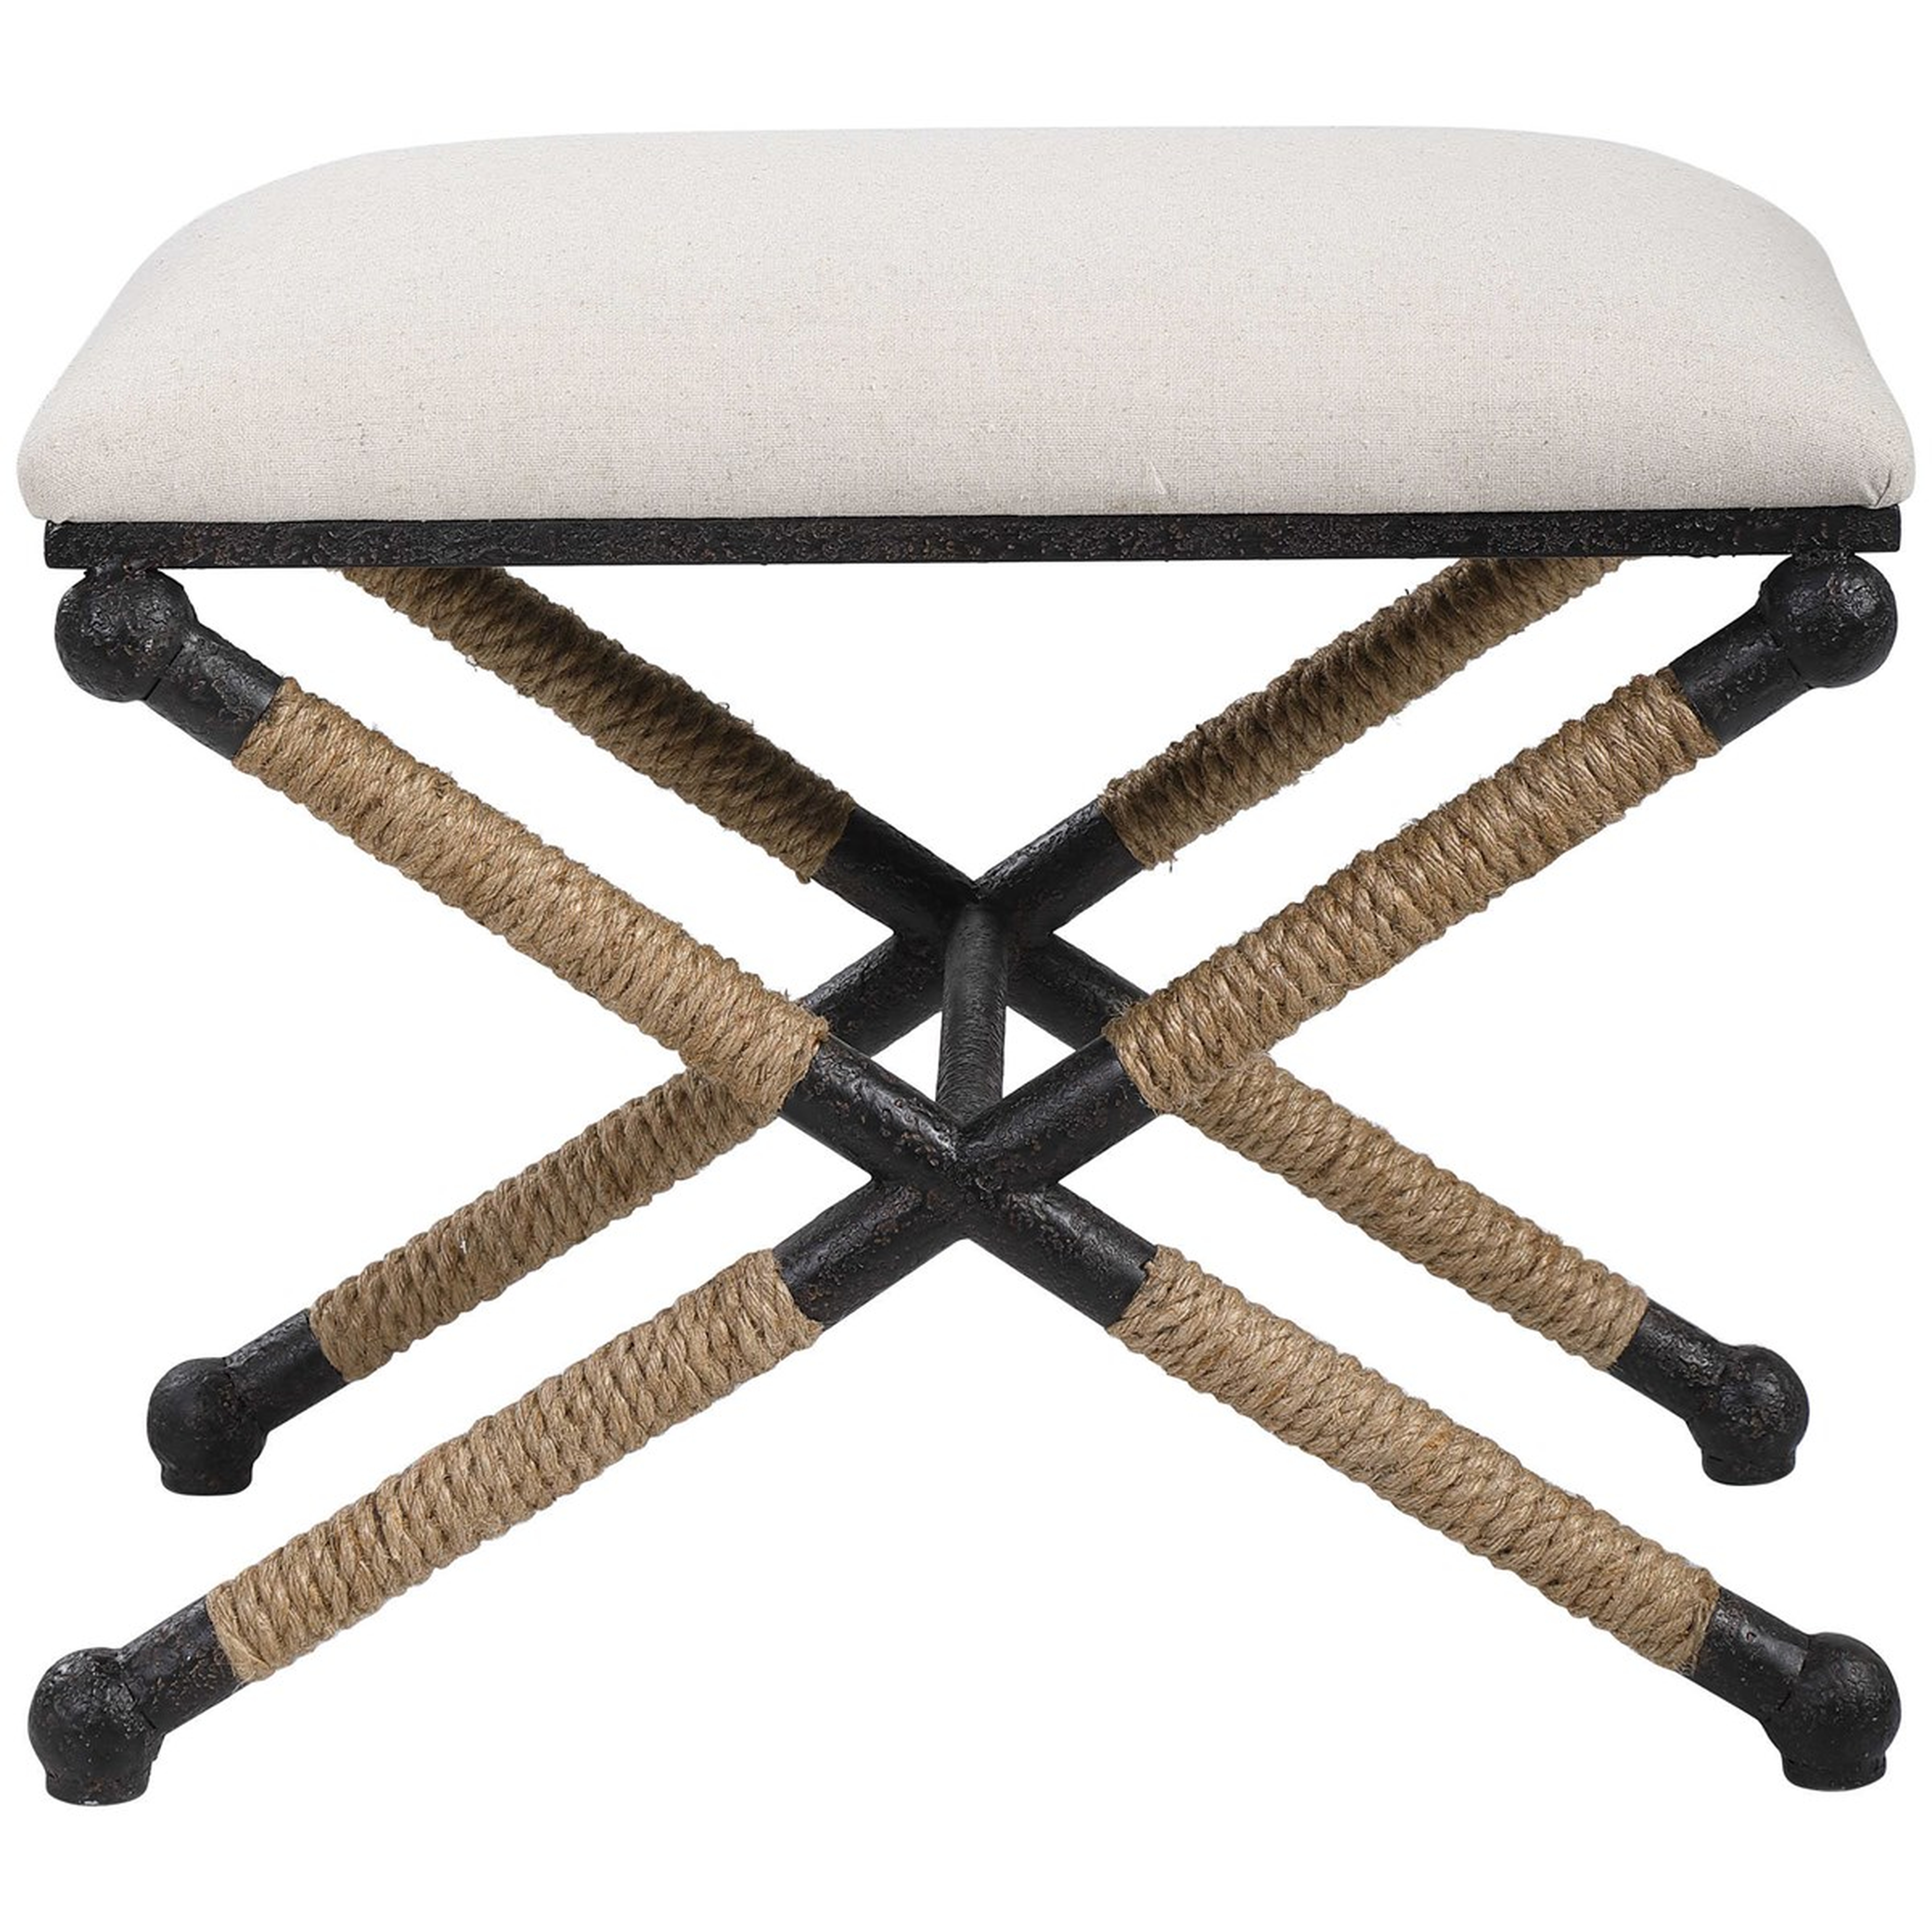 Firth Small Bench, Oatmeal - Hudsonhill Foundry